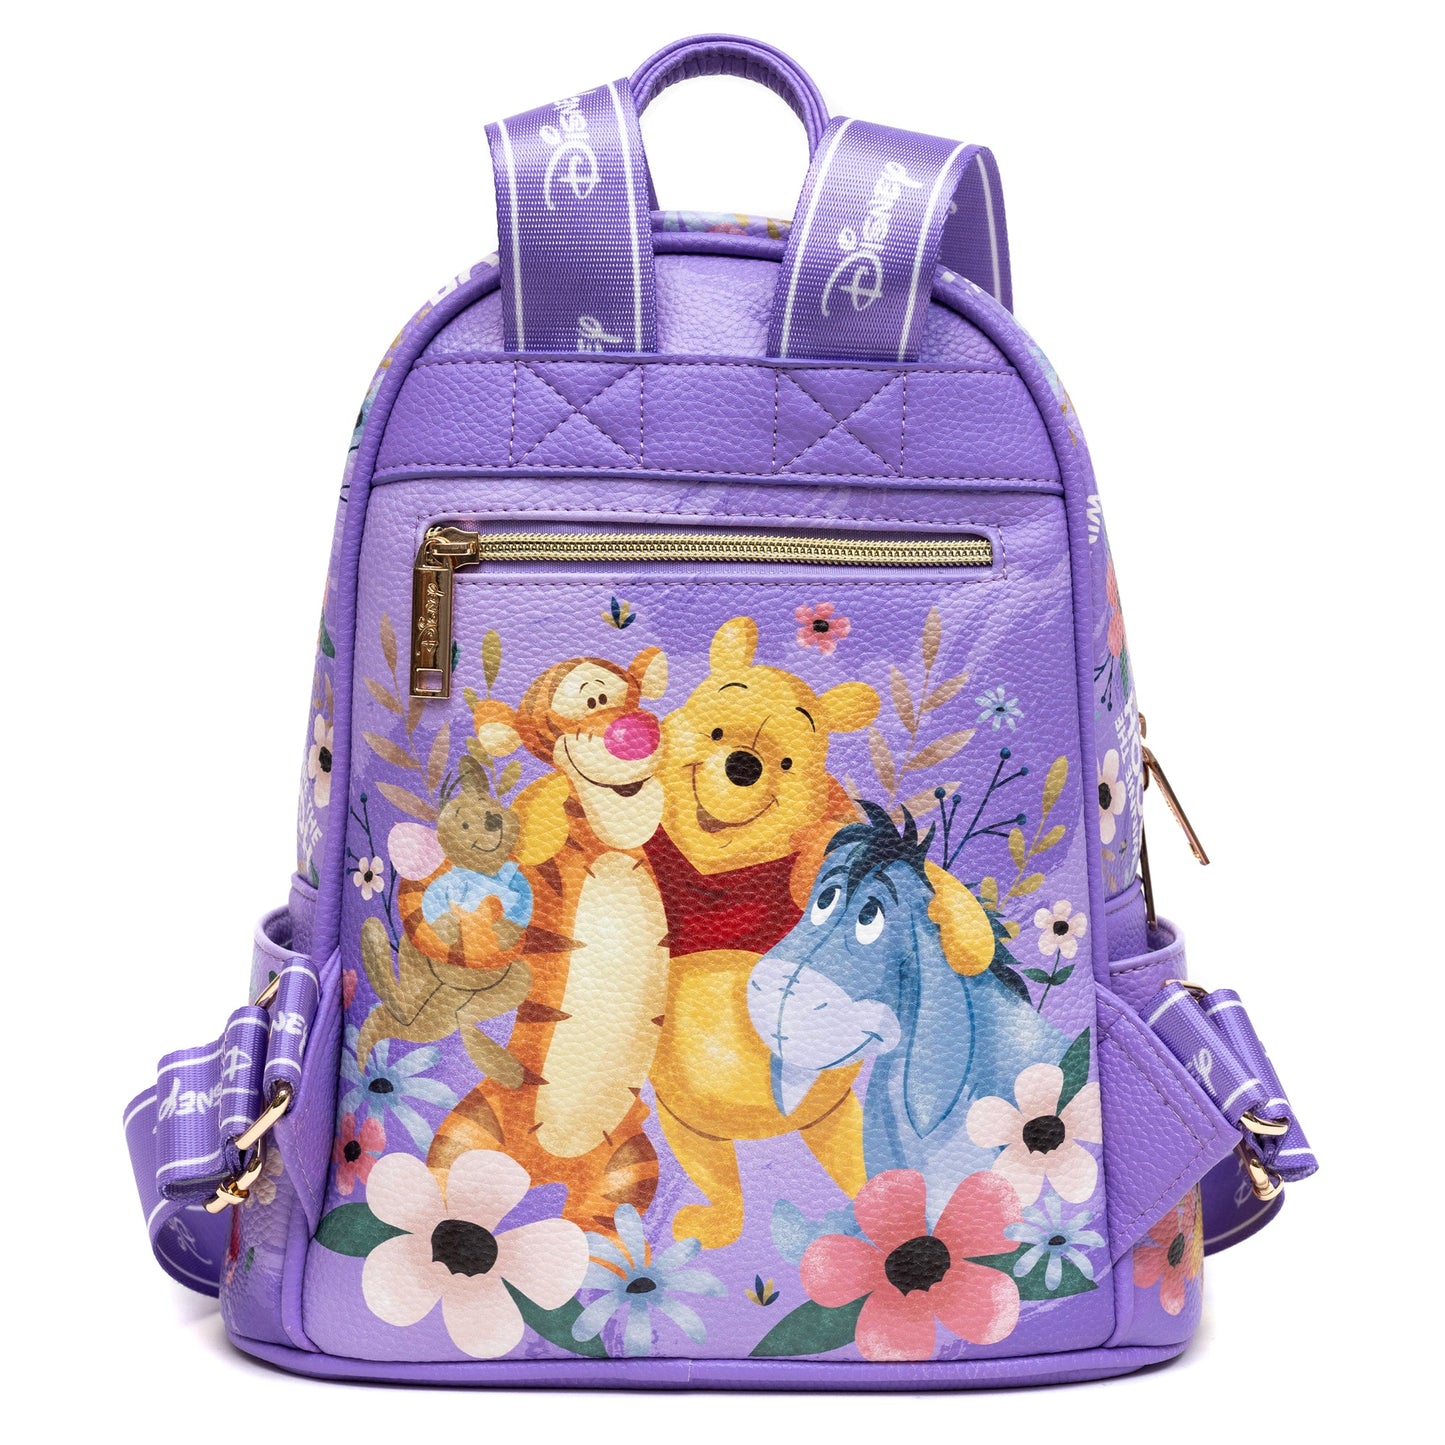 Exclusive Limited Edition-Pueplw Winnie the Pooh Vegan Leather Backpack